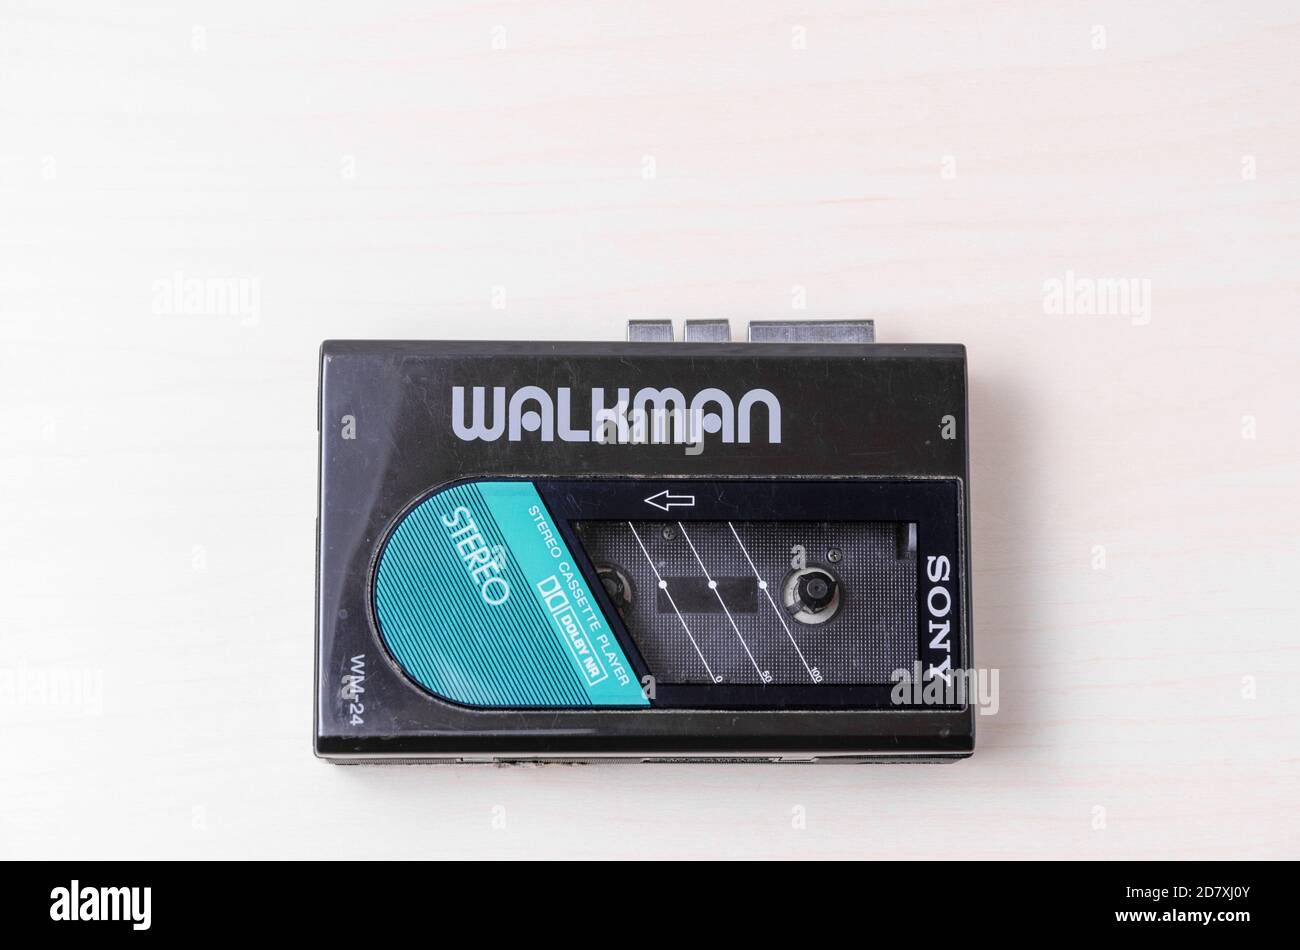 Sony Walkman Cassette Player WM-24, 1984 until 1987, compact audio music, on wooden desk or table, flat lay, studio Stock Photo